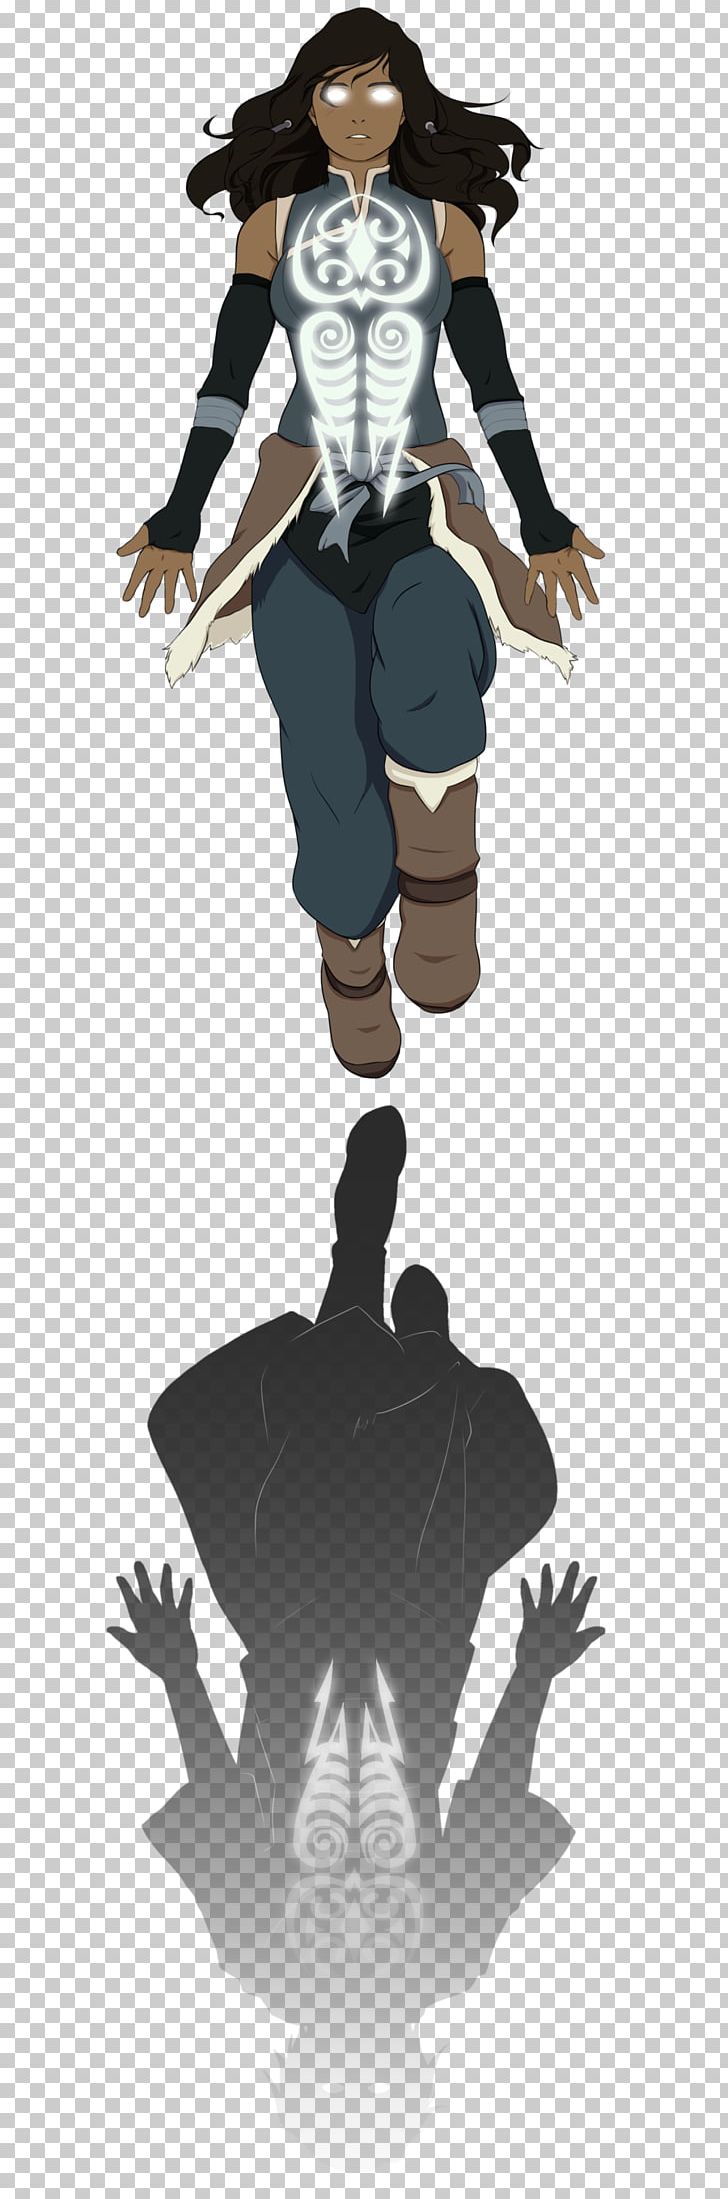 Korra Toph Beifong Zaheer The Avatar State PNG, Clipart, Art, Avatar, Avatar State, Avatar The Last Airbender, Character Free PNG Download